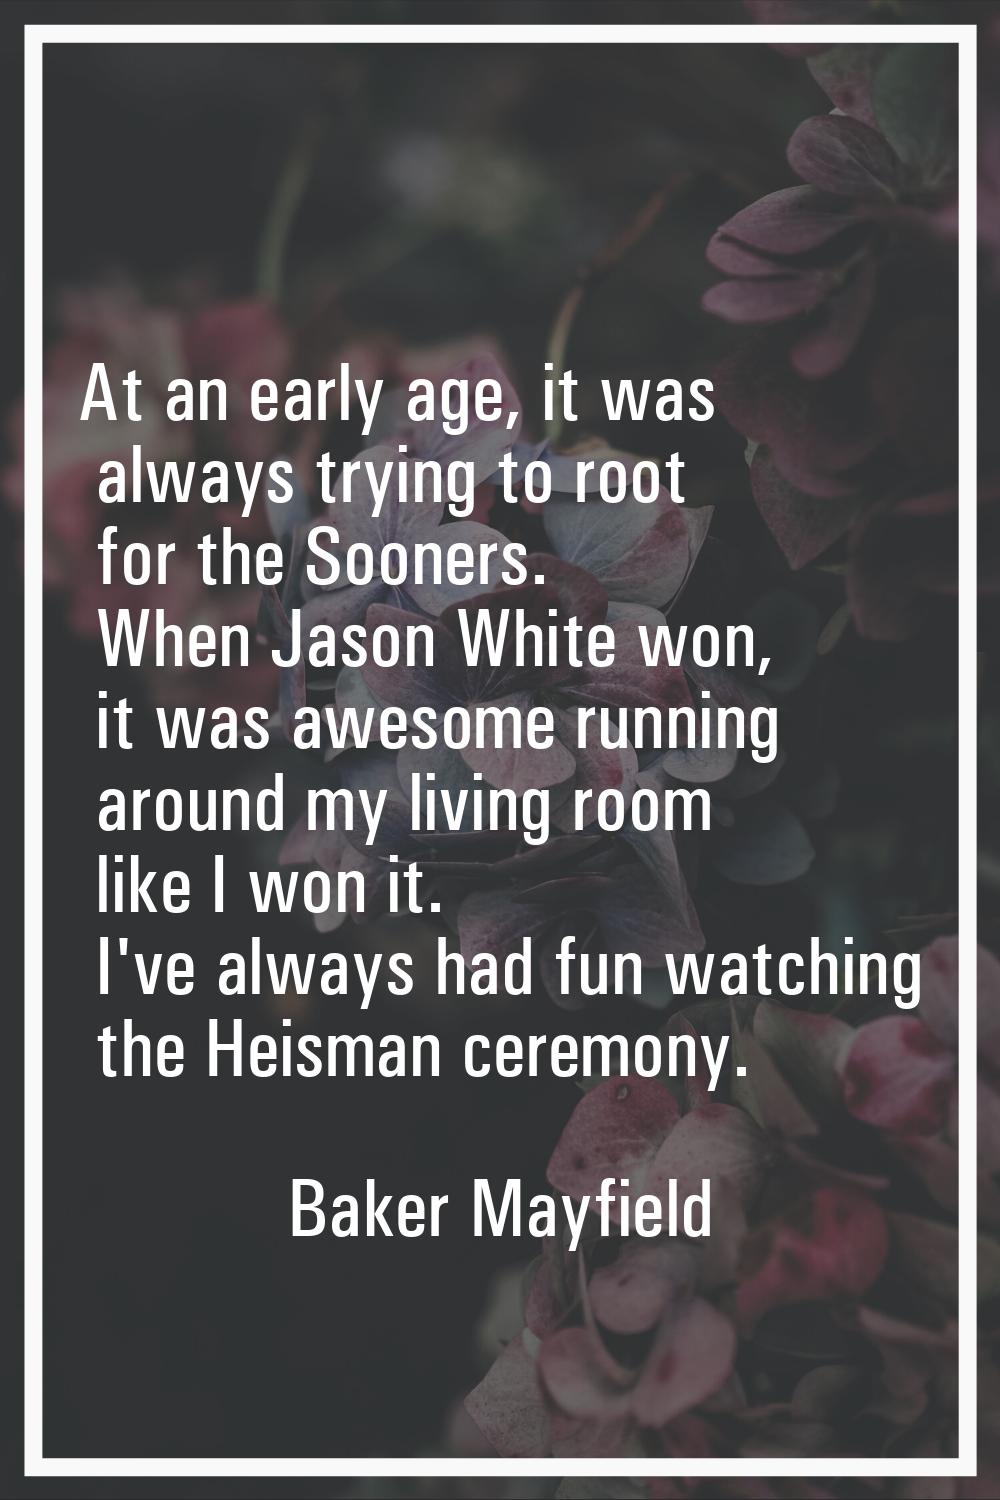 At an early age, it was always trying to root for the Sooners. When Jason White won, it was awesome